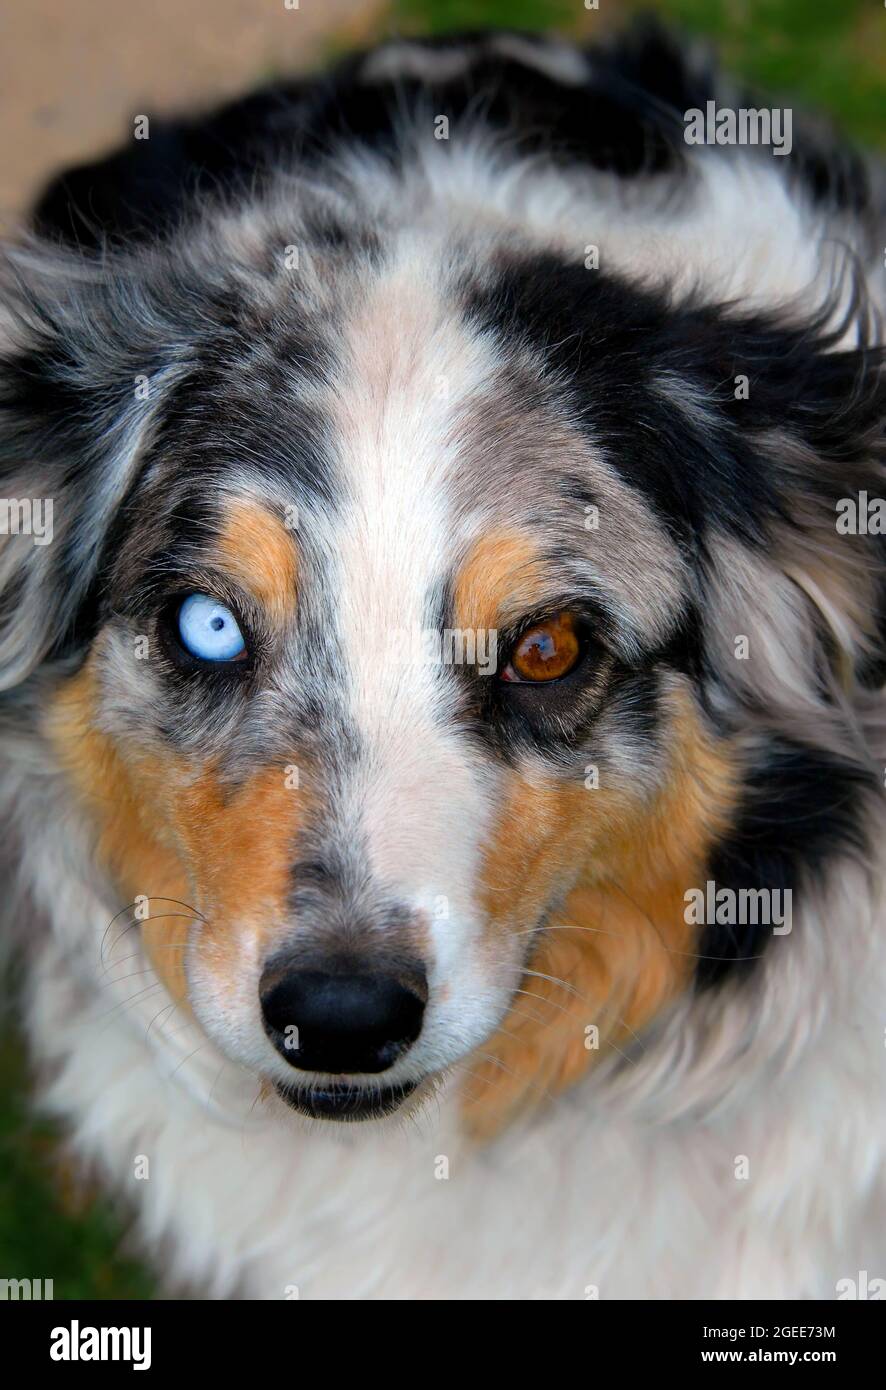 Australian Shepherd has a startling light blue eye and a brown eye.  Verigated and colored fur trims his face with brown, black and white Stock  Photo - Alamy